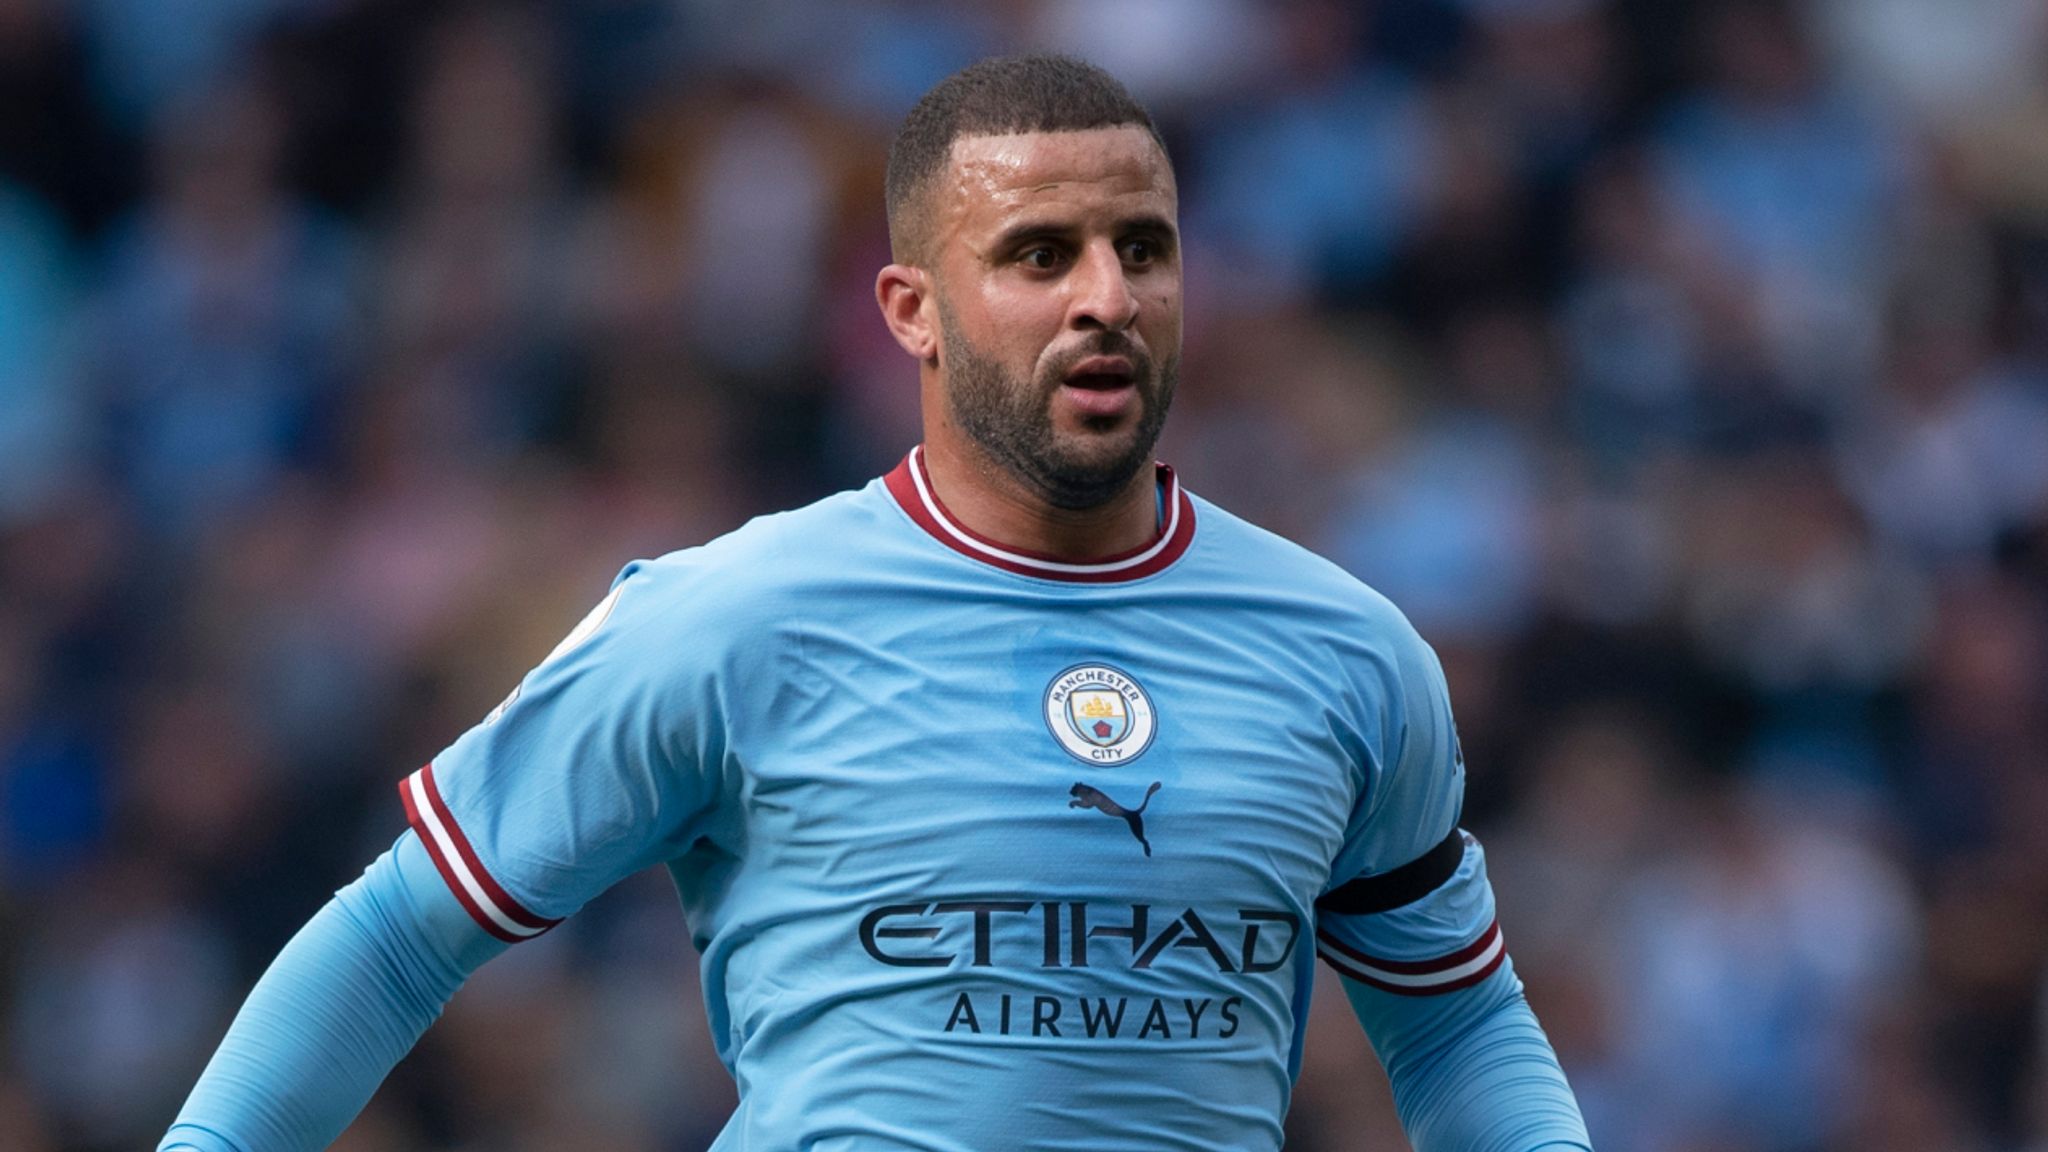 Man City stalwart responds to Guardiola fears that he could miss the Champions League final